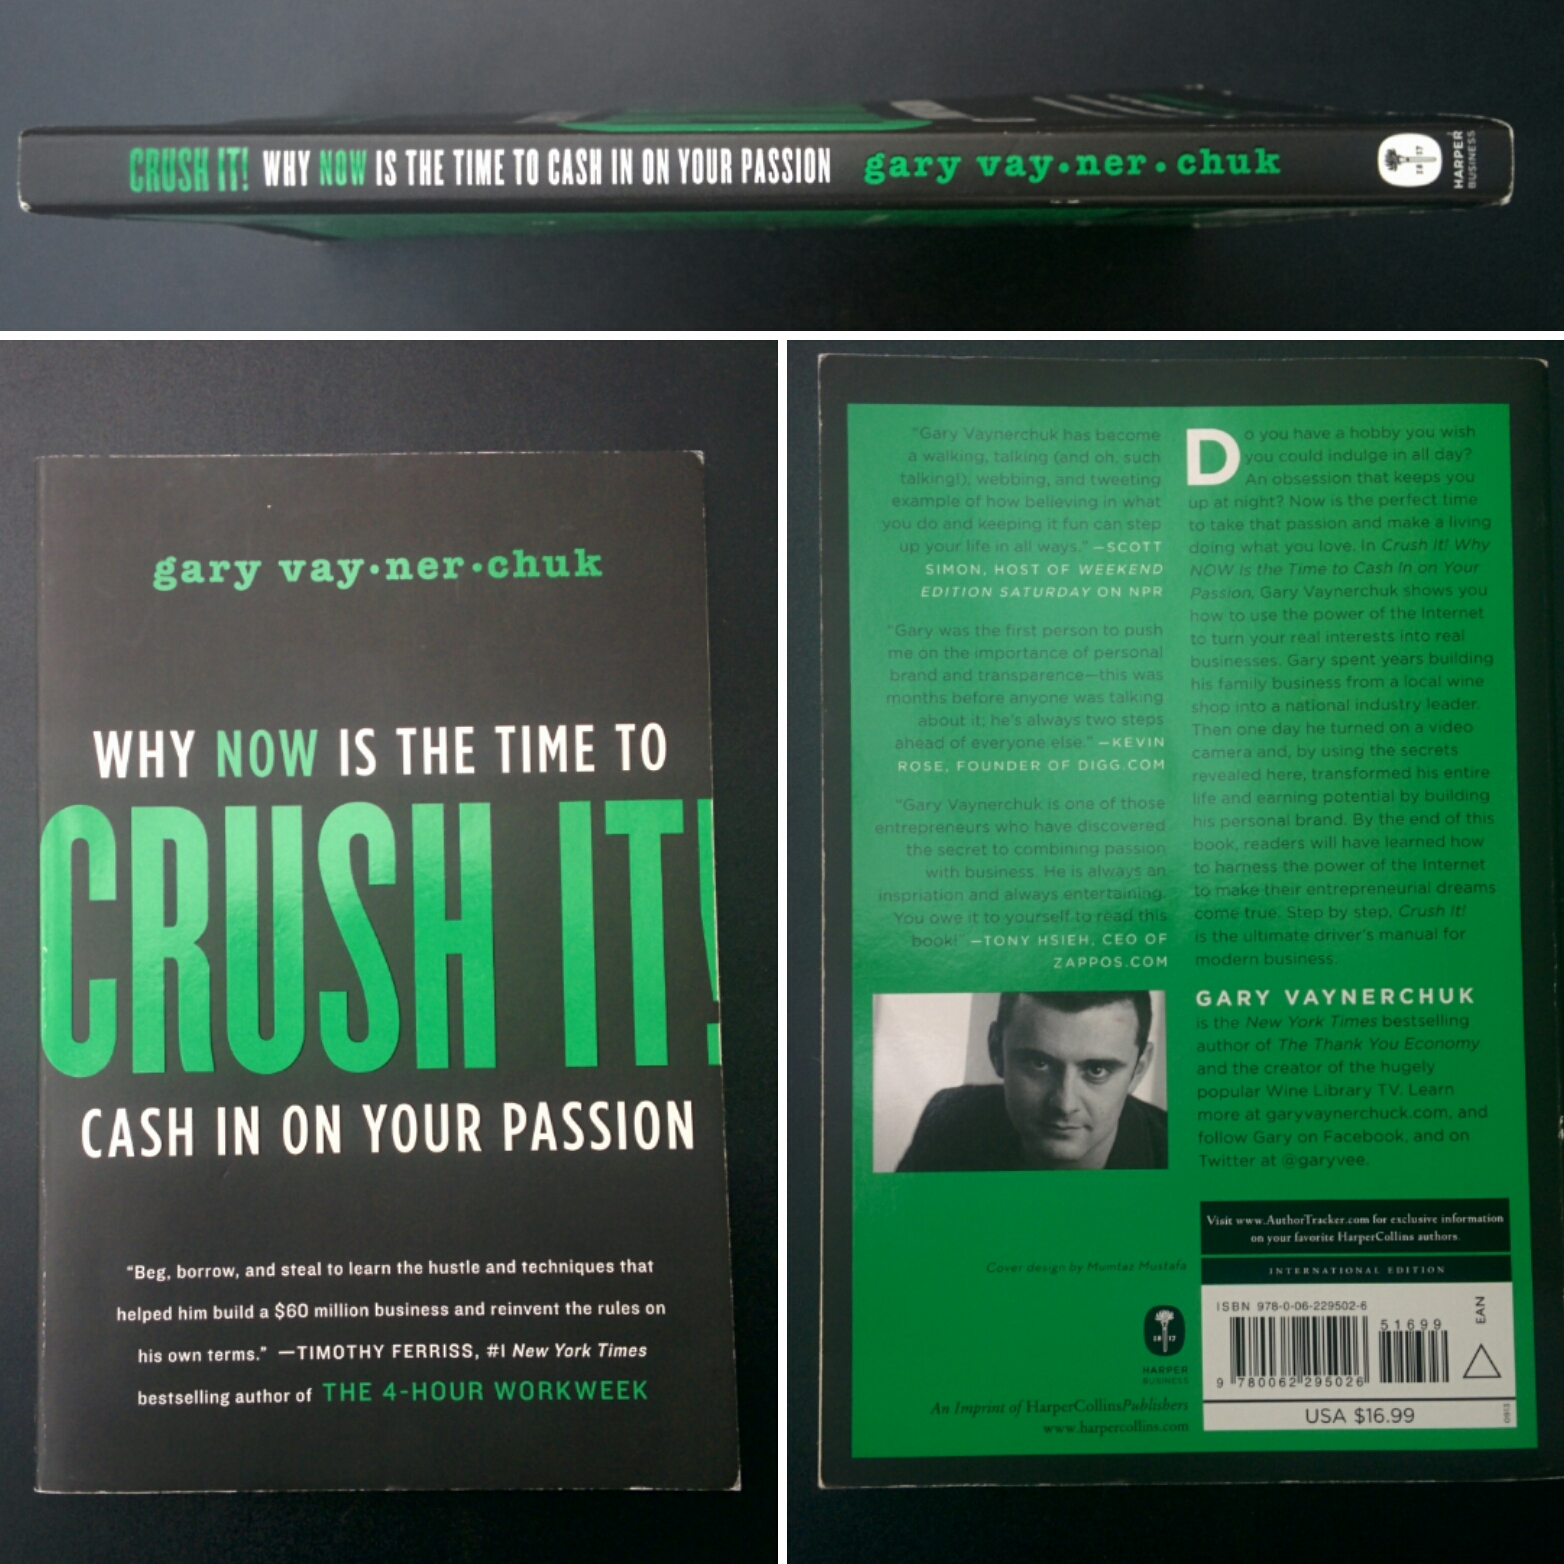 Crush It! Why NOW Is the Time to Cash In on Your Passion